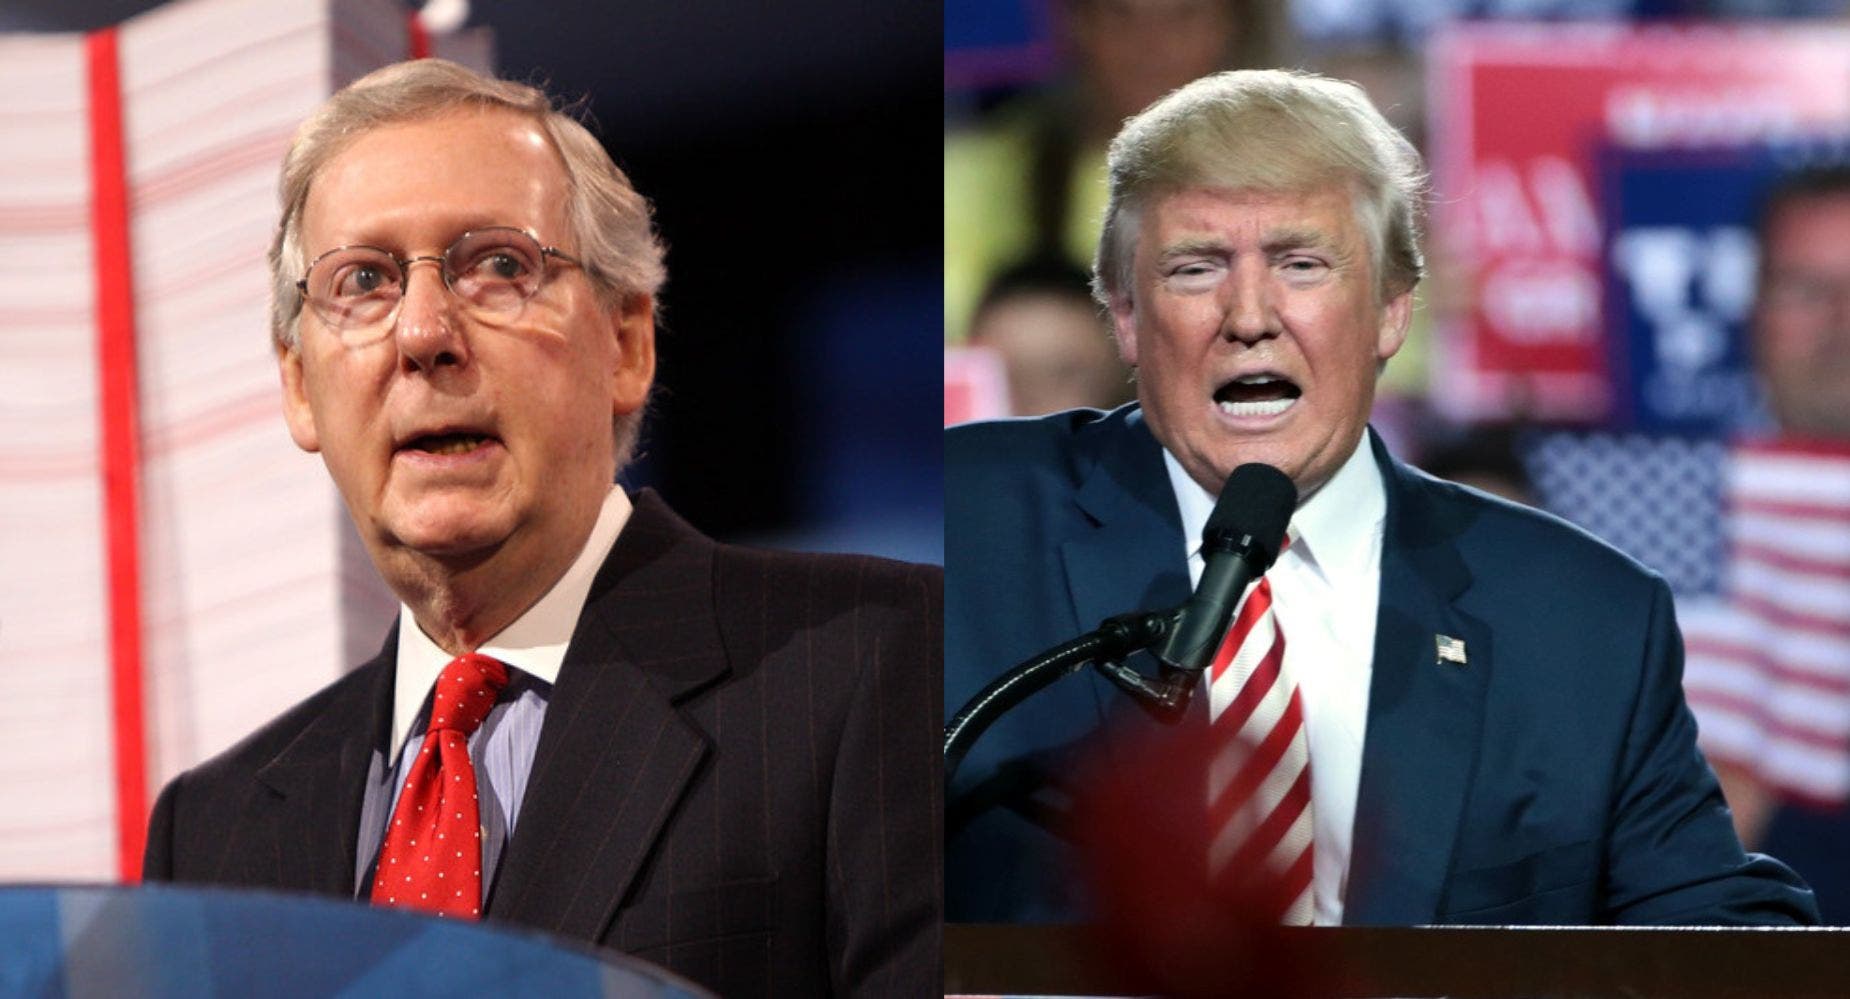 Trump Says Mitch McConnell Has A 'DEATH WISH,'  Makes Racial Slur Against His Wife Elaine Chao